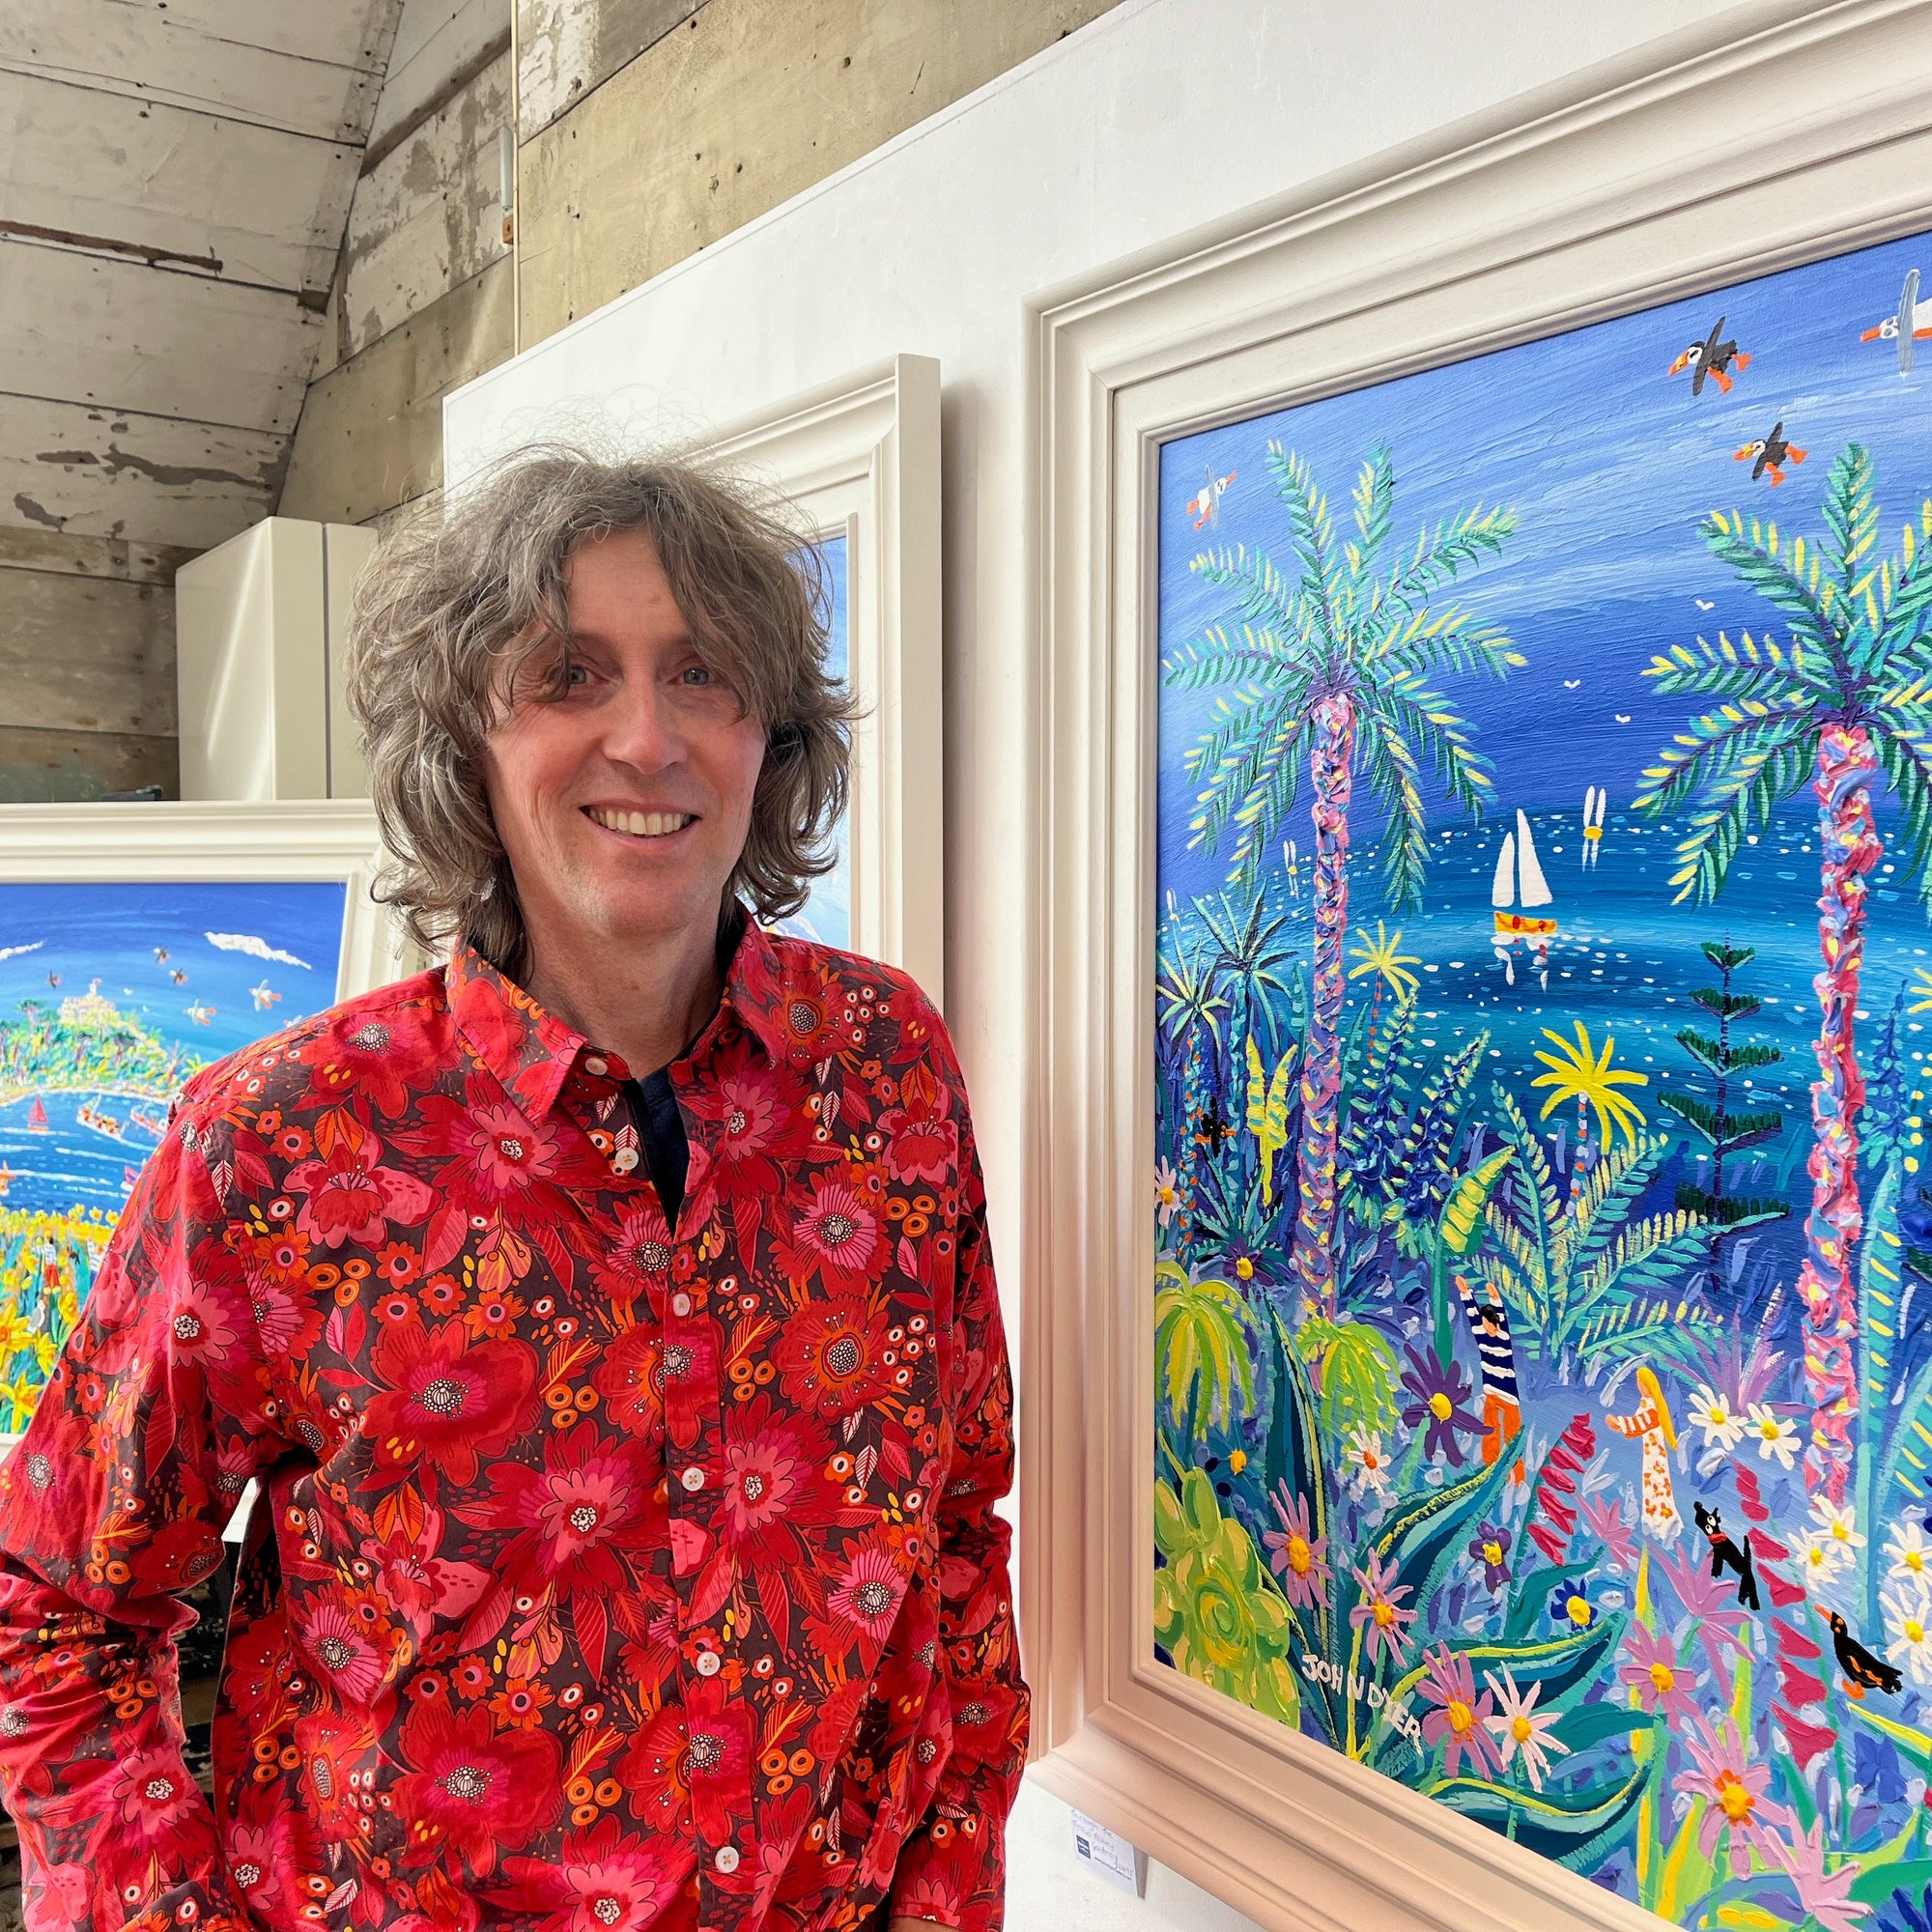 Cornish artist John Dyer pictured in the Porthmeor studios St Ives in Cornwall